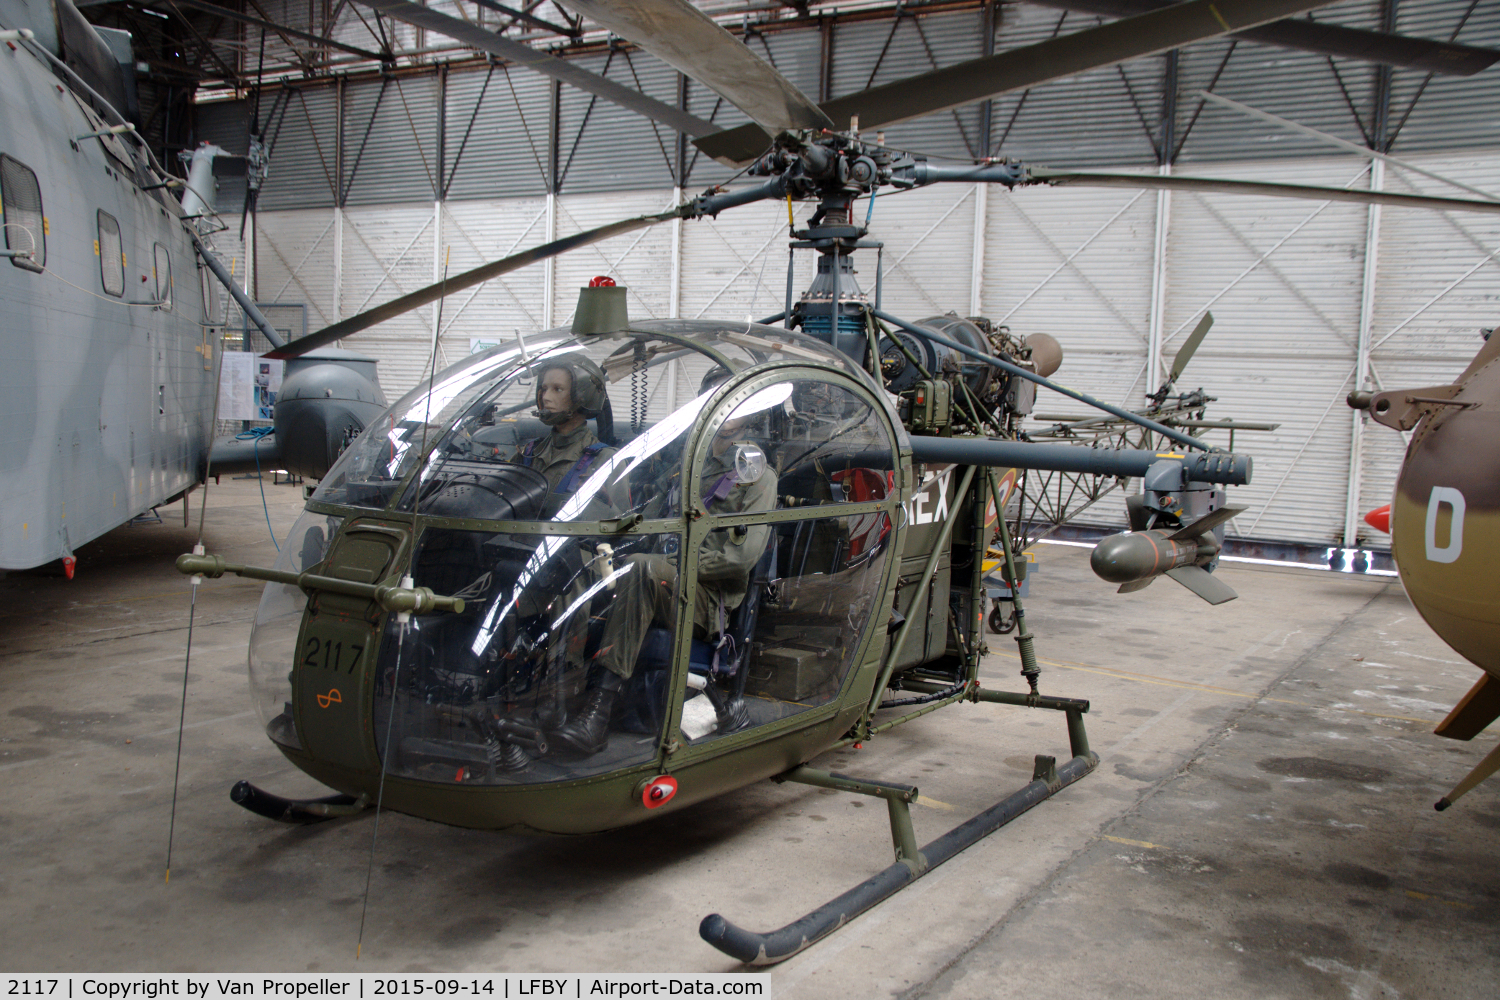 2117, Aérospatiale SA-318C Alouette II Astazou C/N 2117, Sud Aviation SA318C Alouette II with anti-tank missiles in the ALAT museum in Dax, southern France